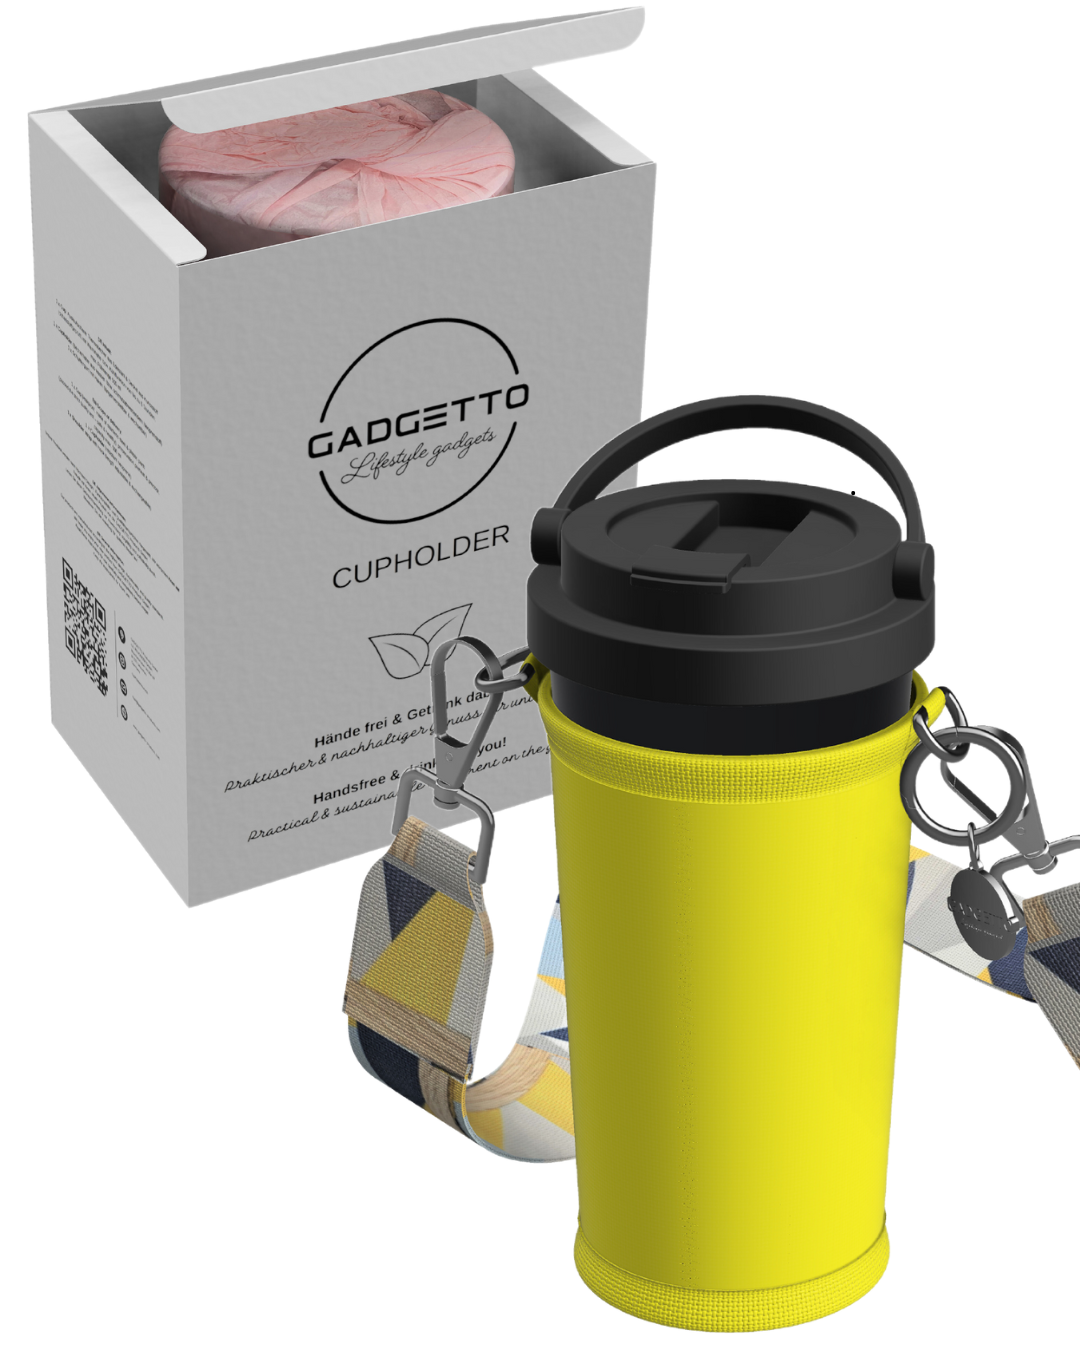 Cupholder Set 3-teilig (inkl. Thermobecher) – GADGETTO Products